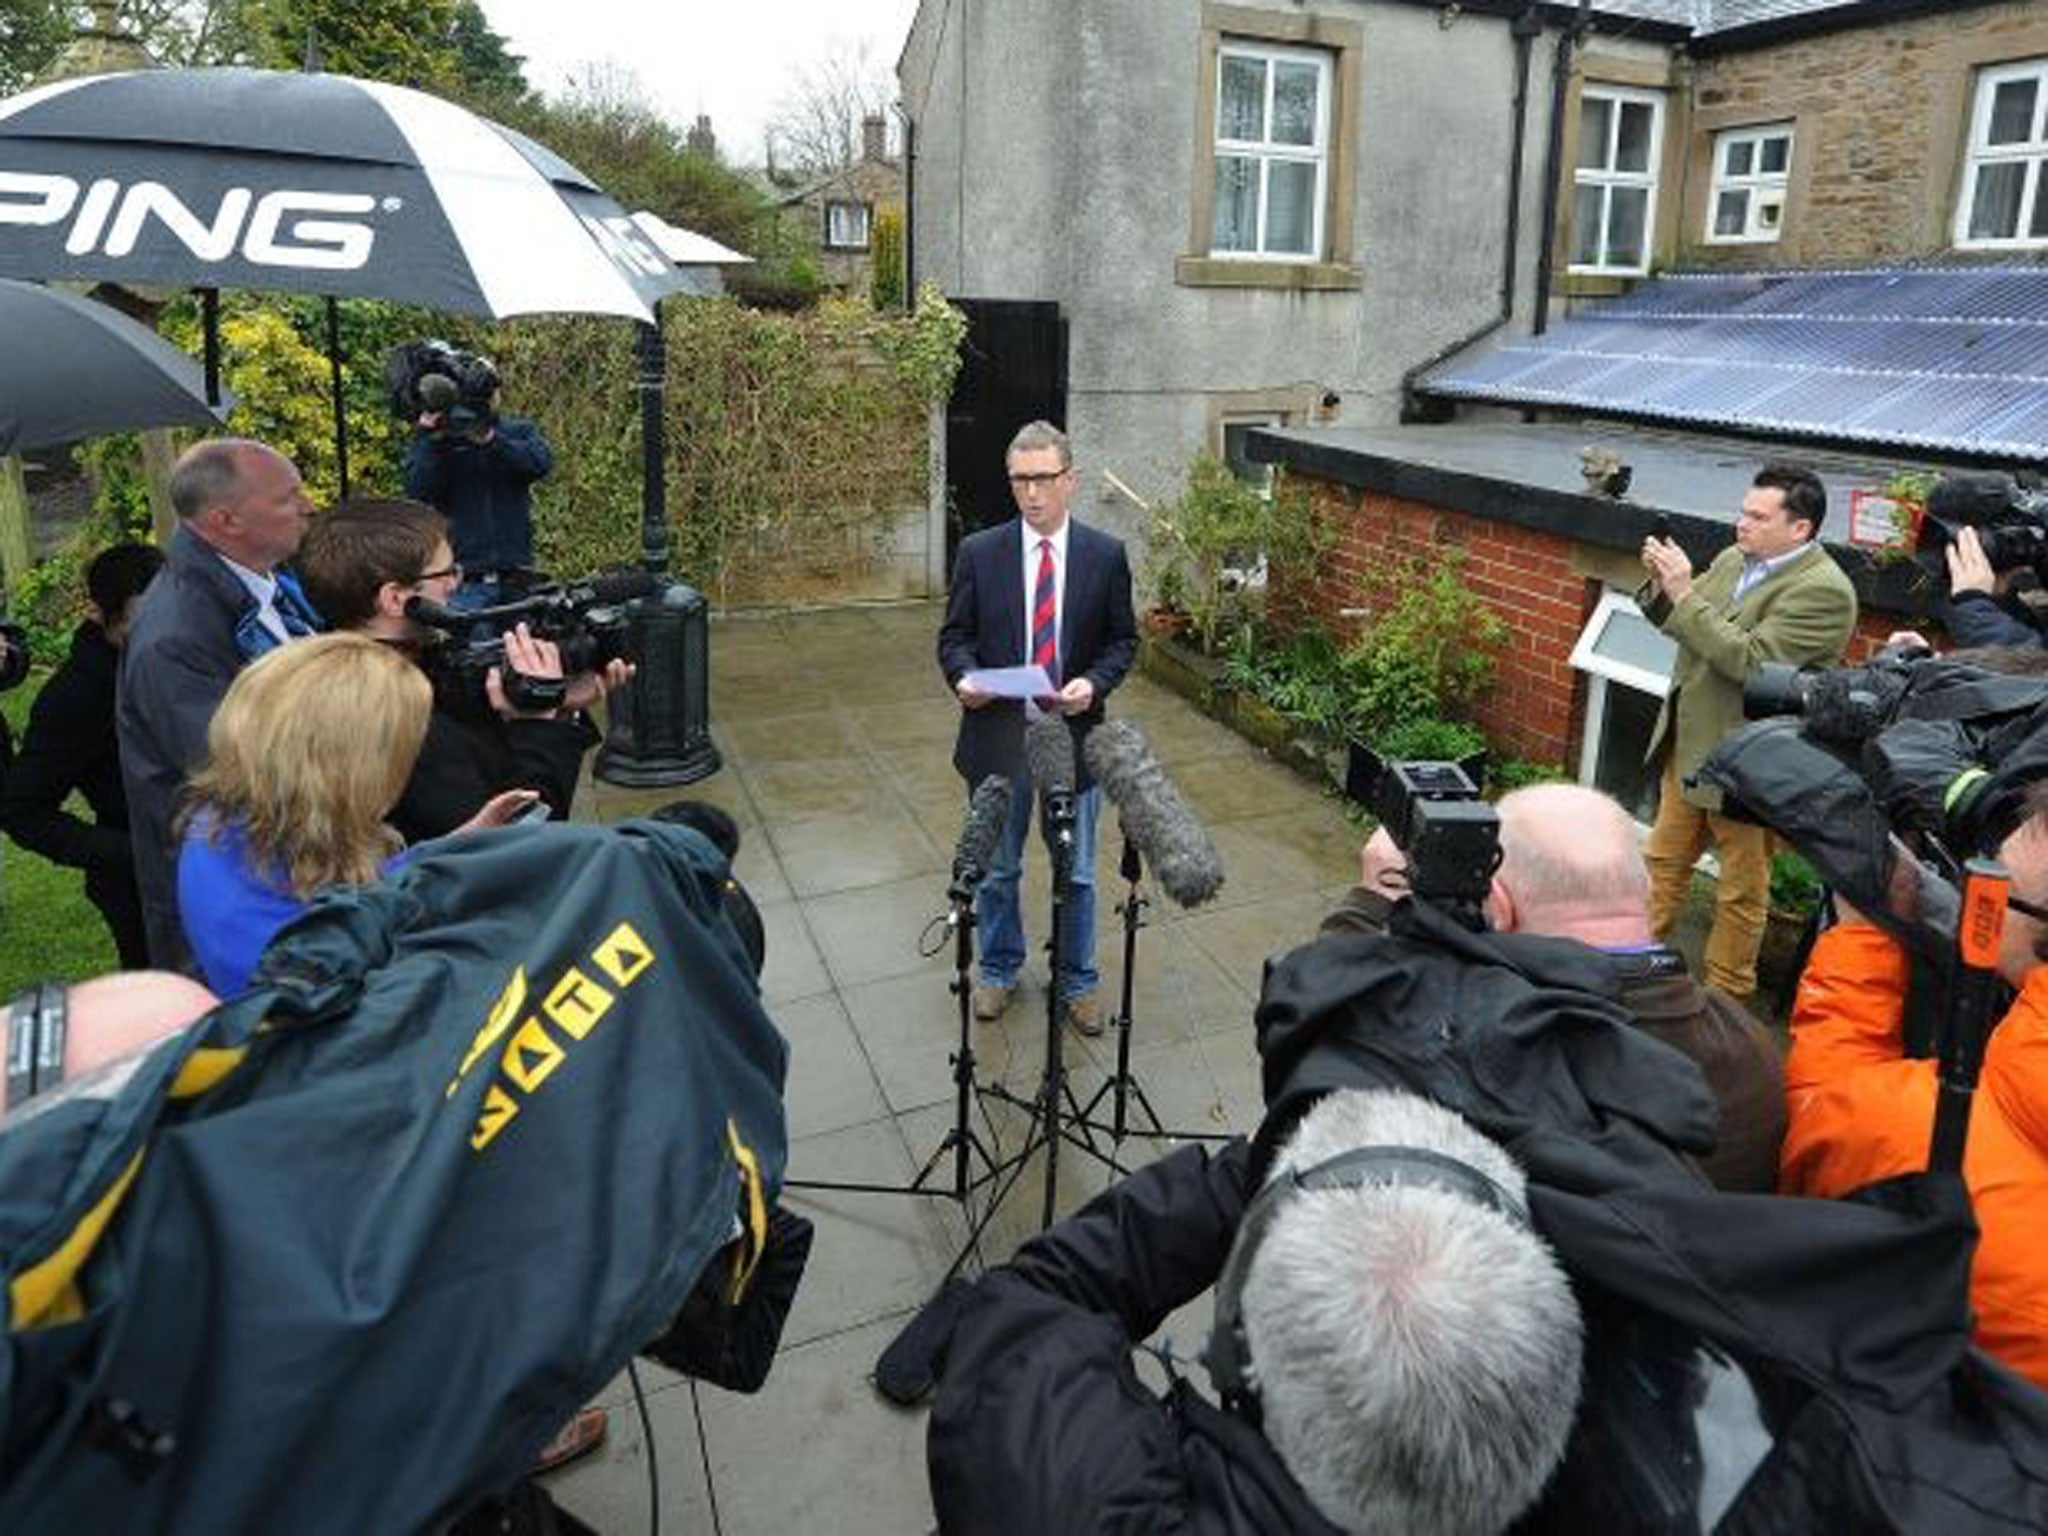 Deputy House speaker Nigel Evans gives a press statement at his home in Pendleton Lancashire